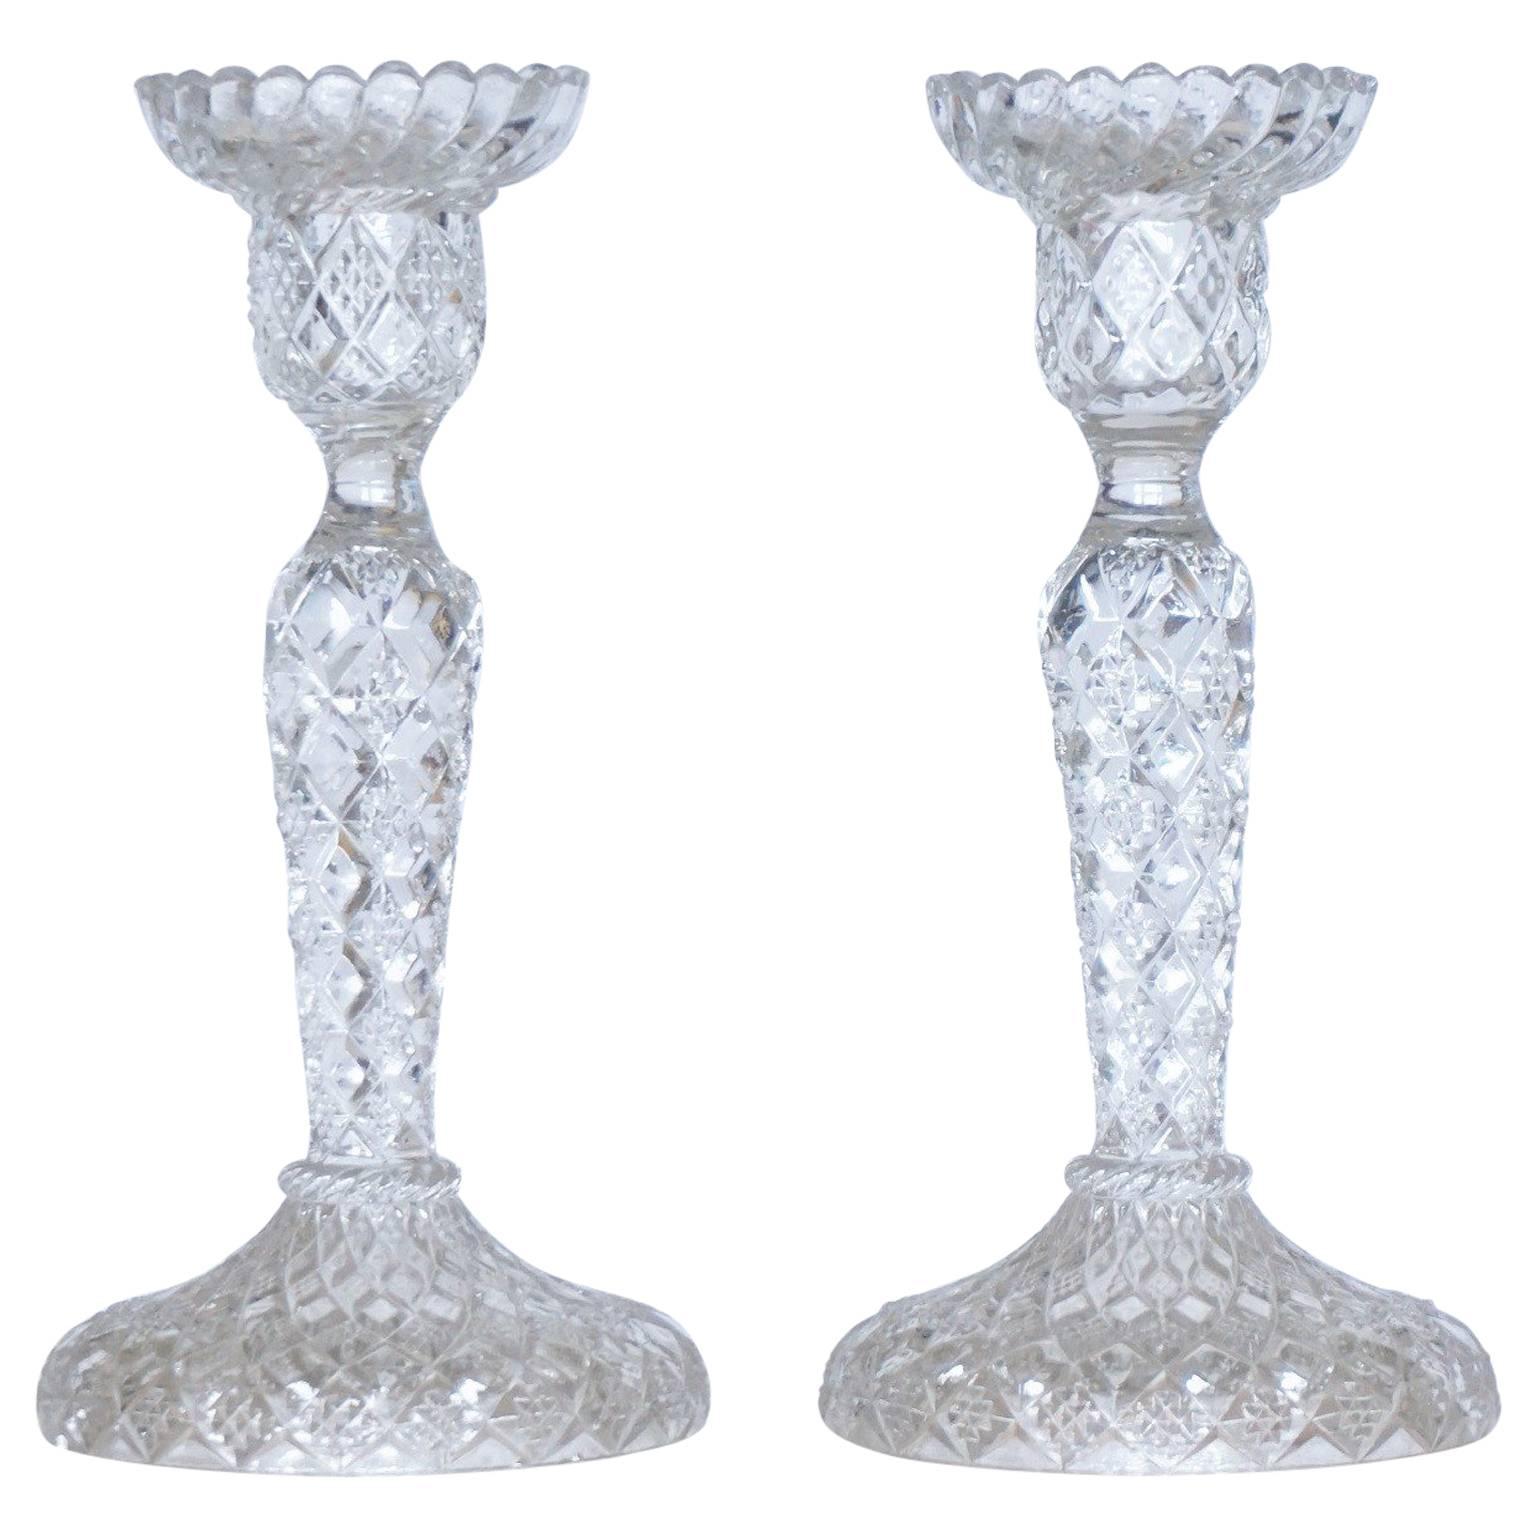 Antique German Pair of Meisenthal Crystal Candlesticks Candleholders, circa 1907